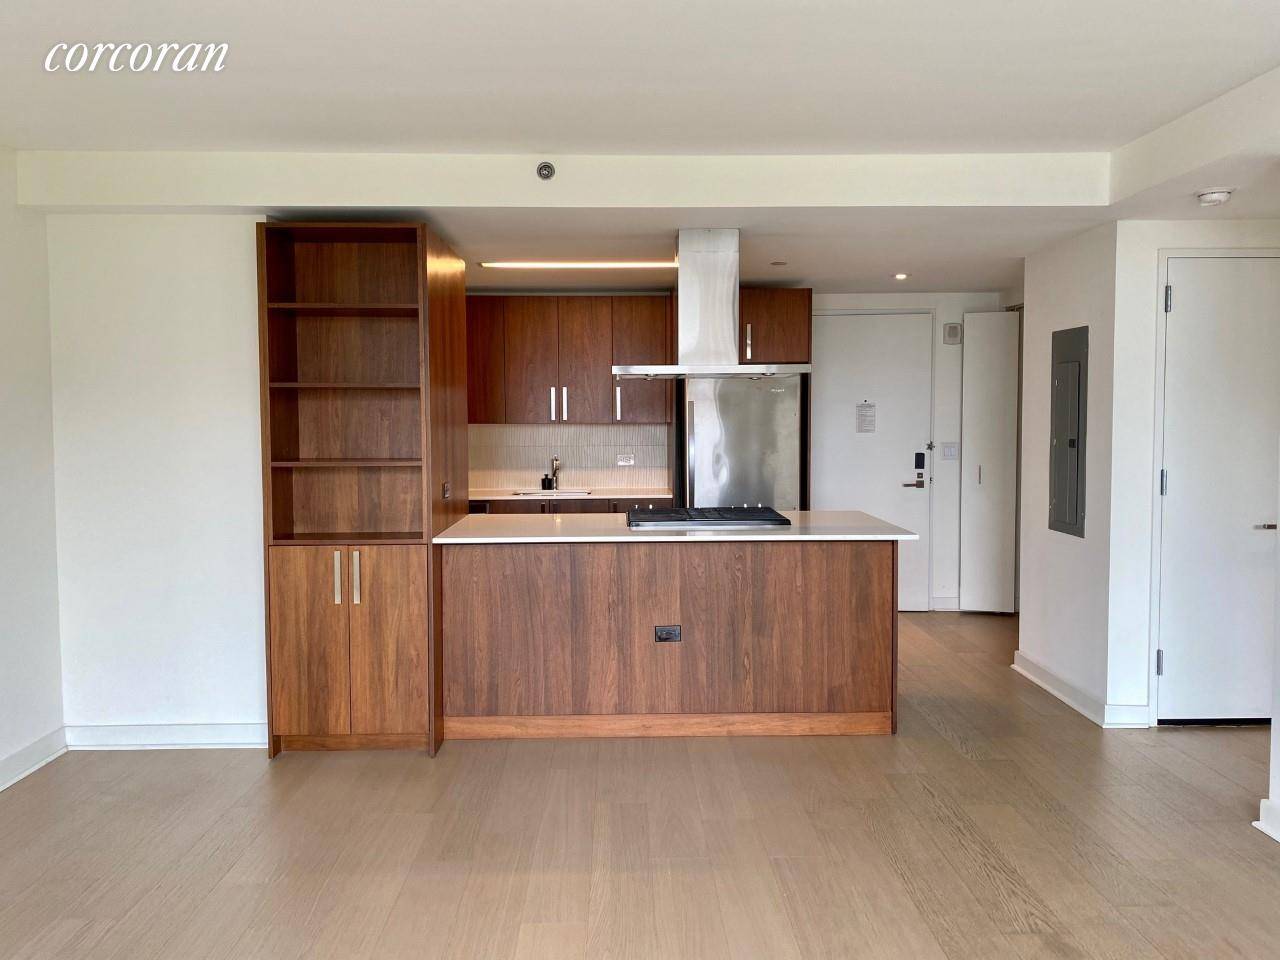 This 1 bed 1 bath luxury rental sub lease or lease assignment offers both the lease length flexibility not available with off the shelf listings from the leasing office and ...